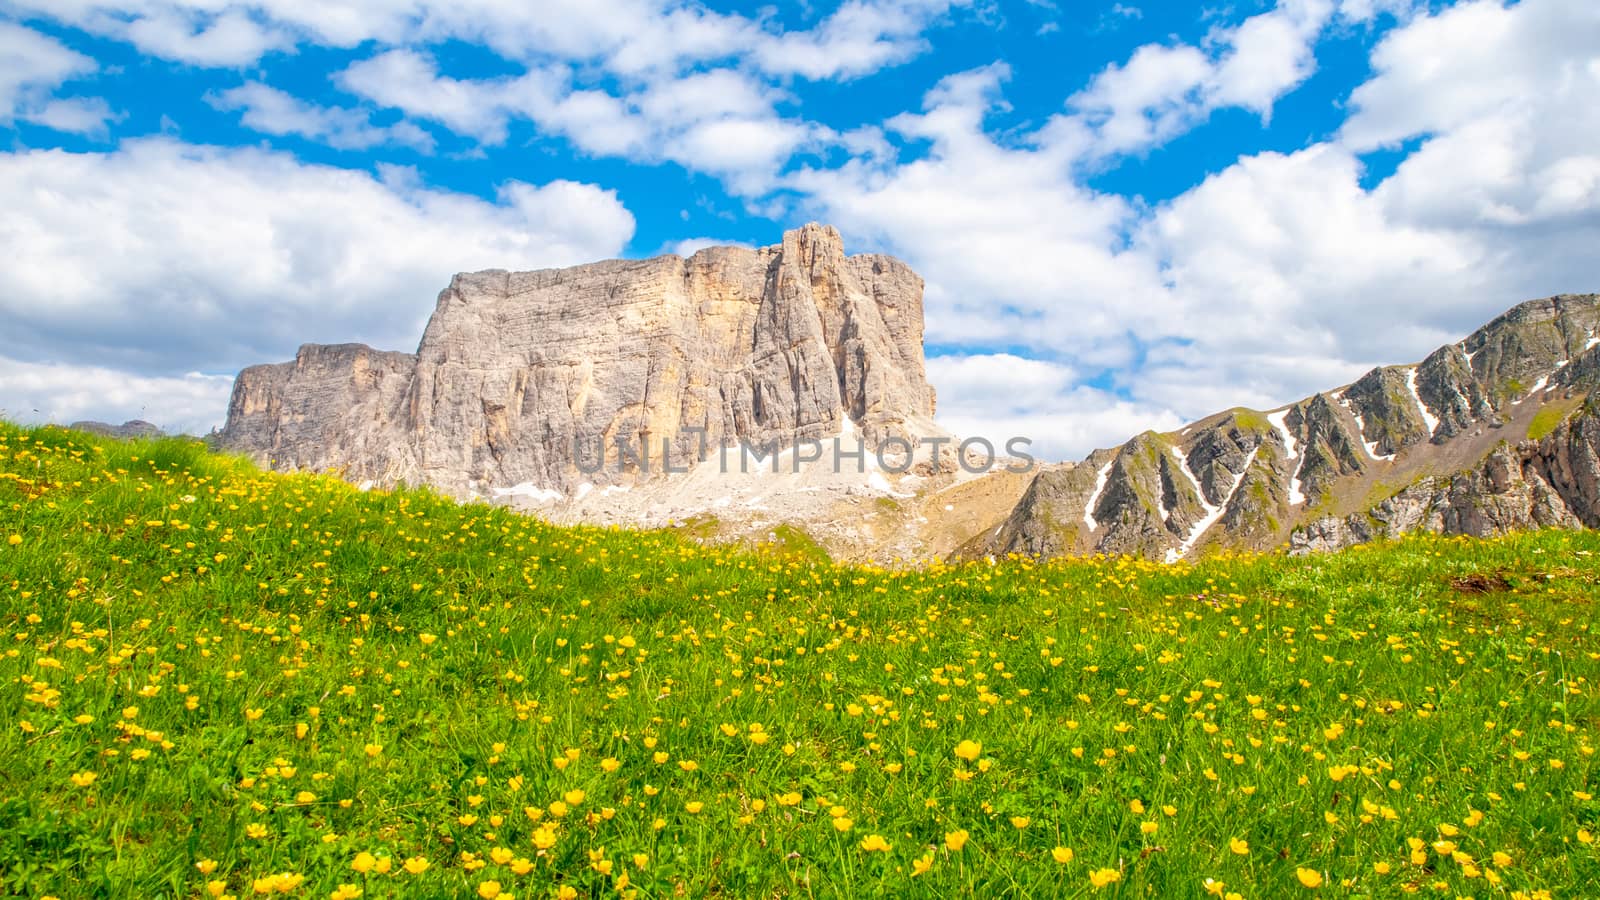 Landscape of Dolomites with green meadows, blue sky, white clouds and rocky mountains.